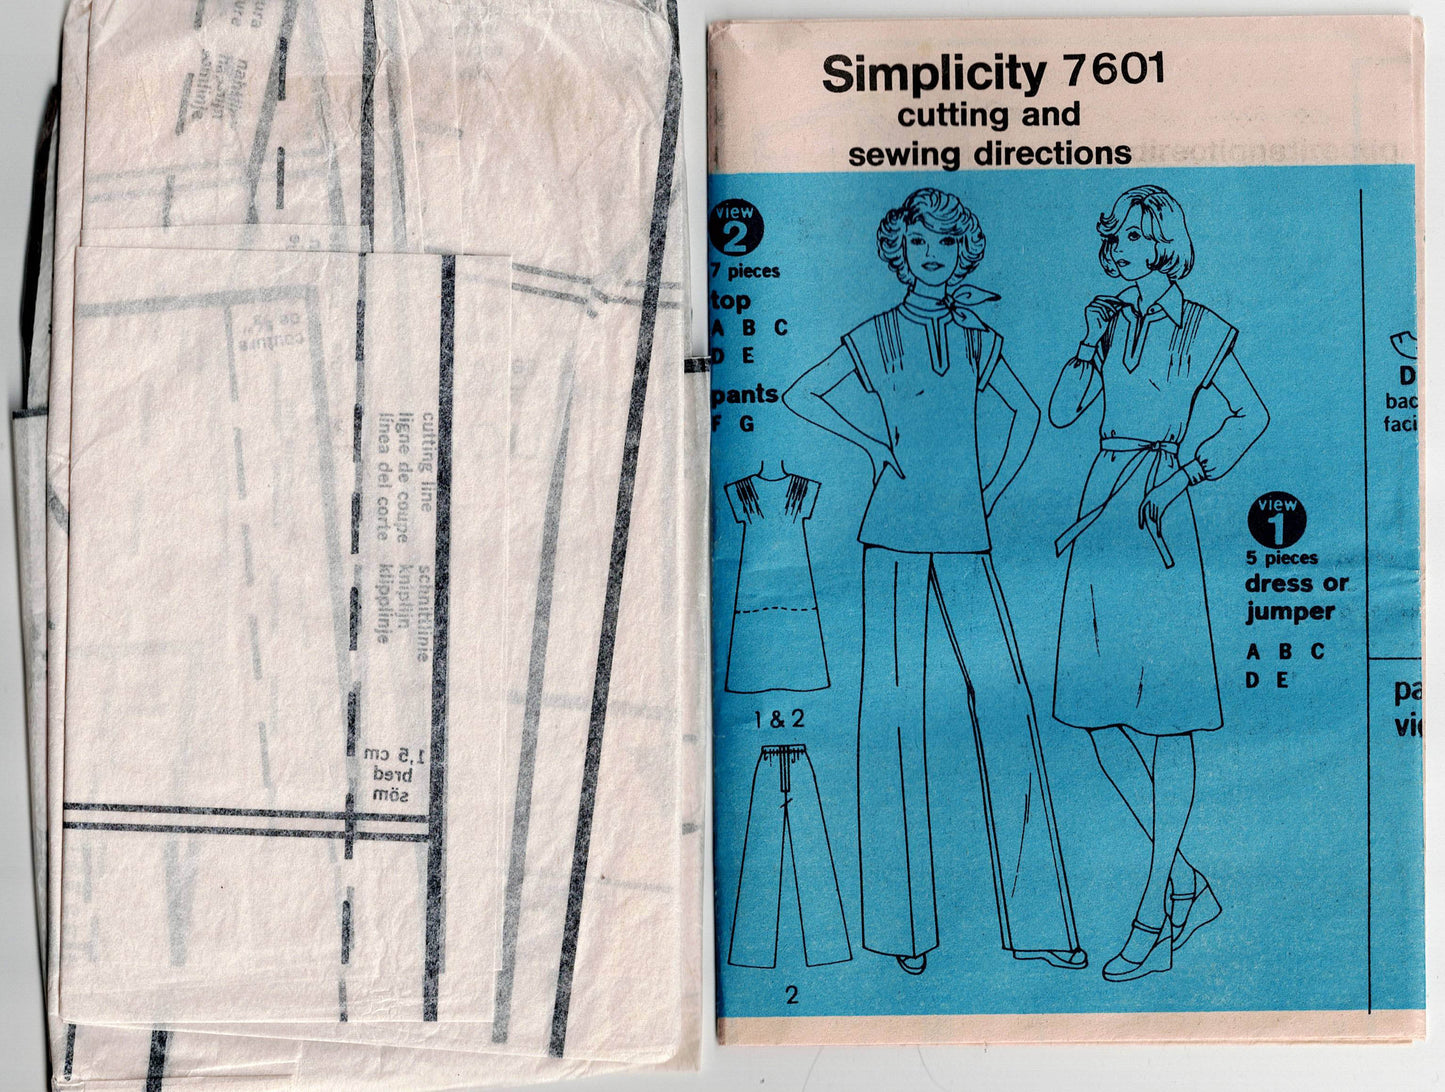 Simplicity 7601 Womens EASY Tucked Pullover Top Dress & Pants 1970s Vintage Sewing Pattern Size 12 Bust 34 inches